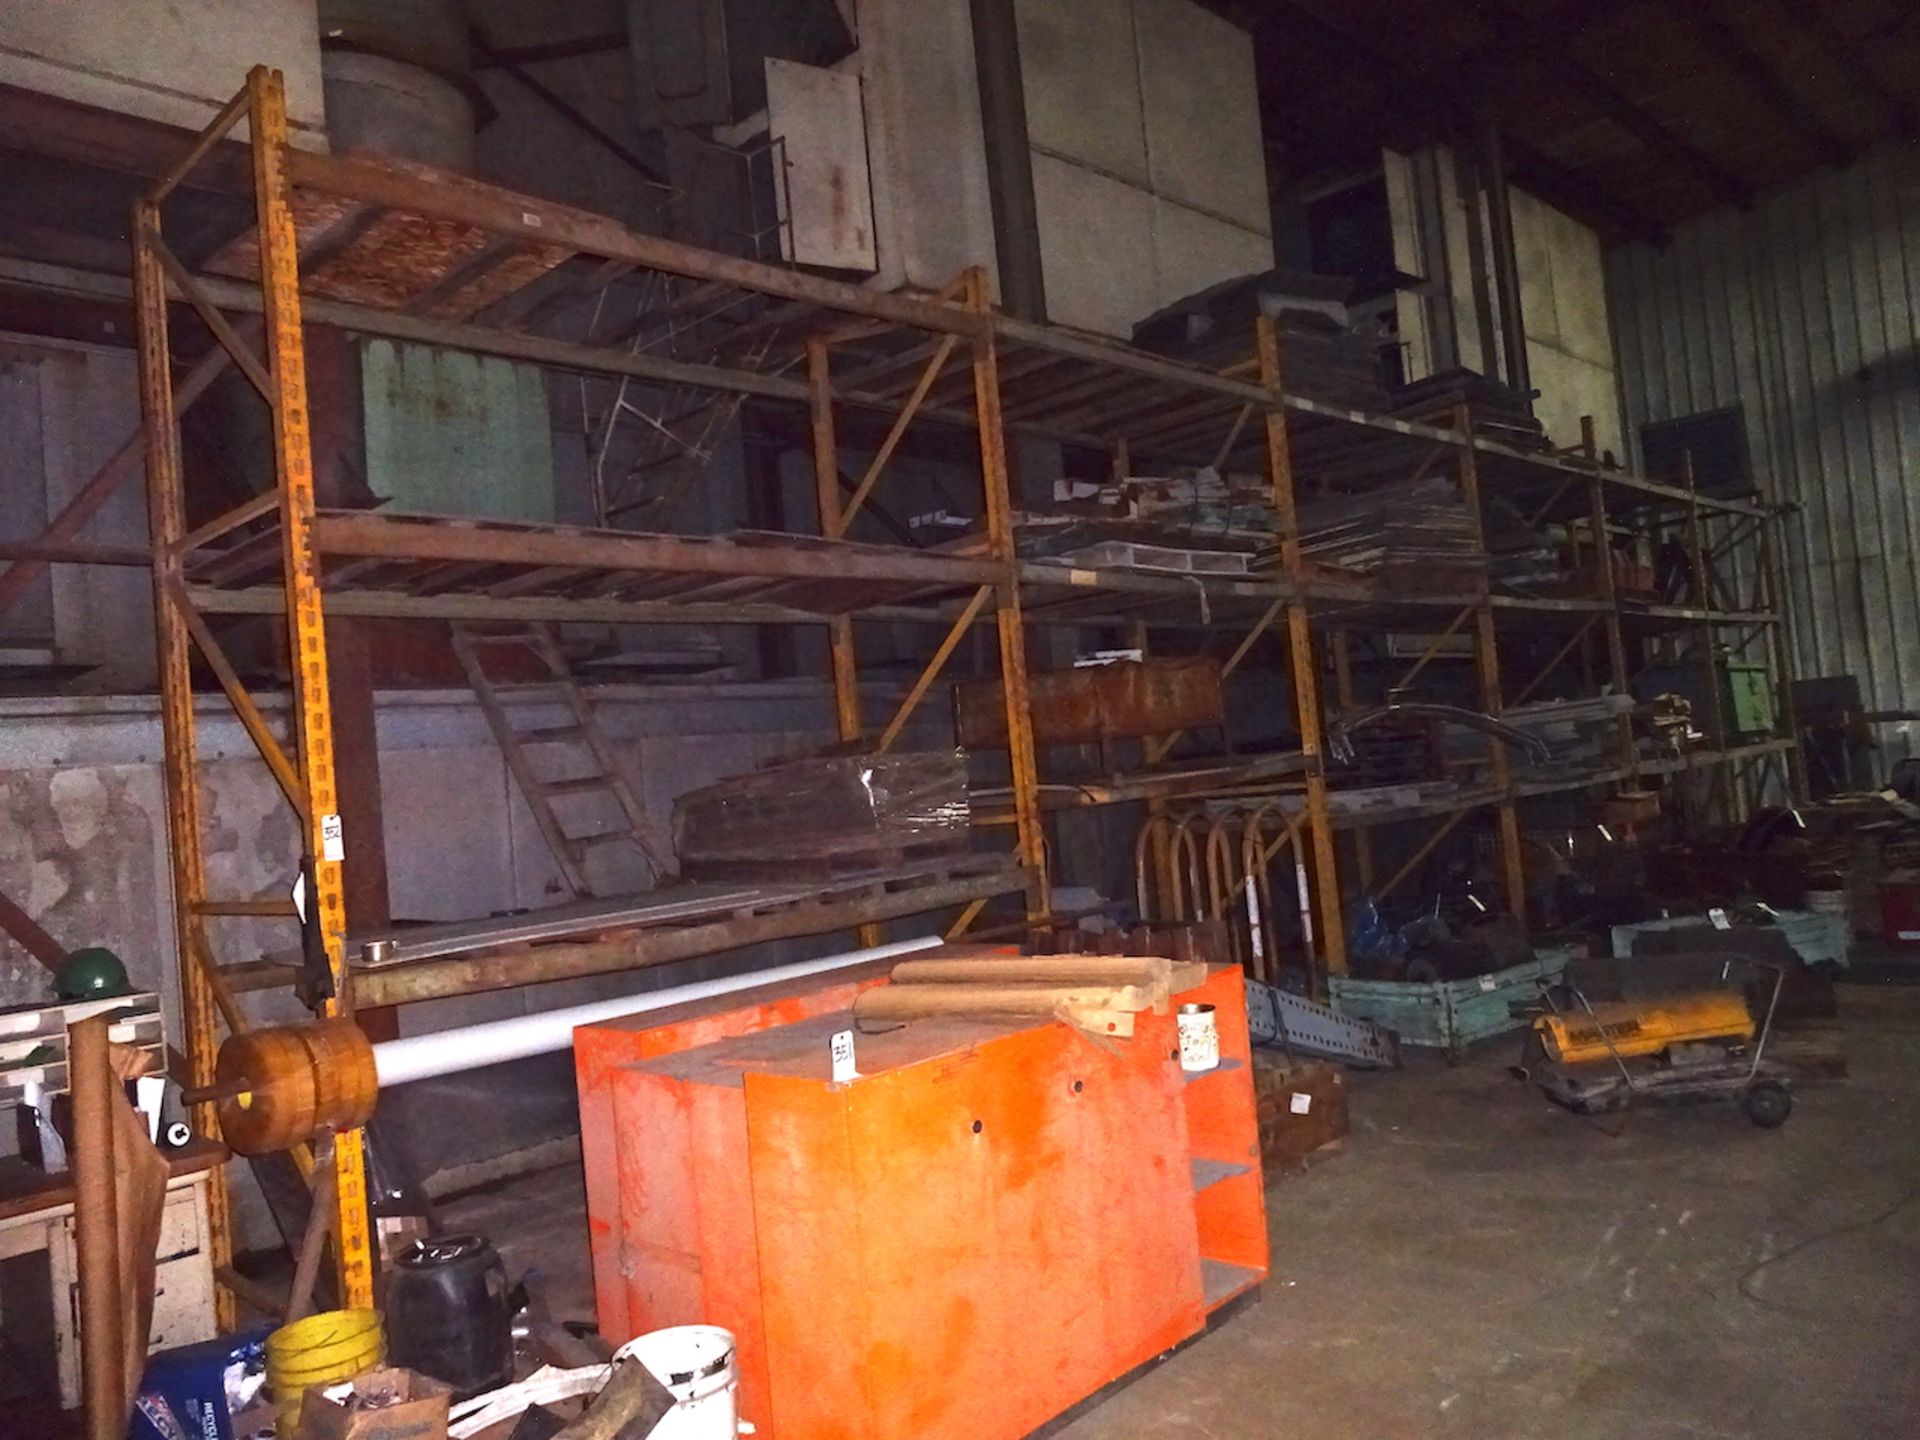 LOT: (6) Sections Heavy Duty Adjustable Pallet Rack, with Contents (excludes cantilever rack parts)